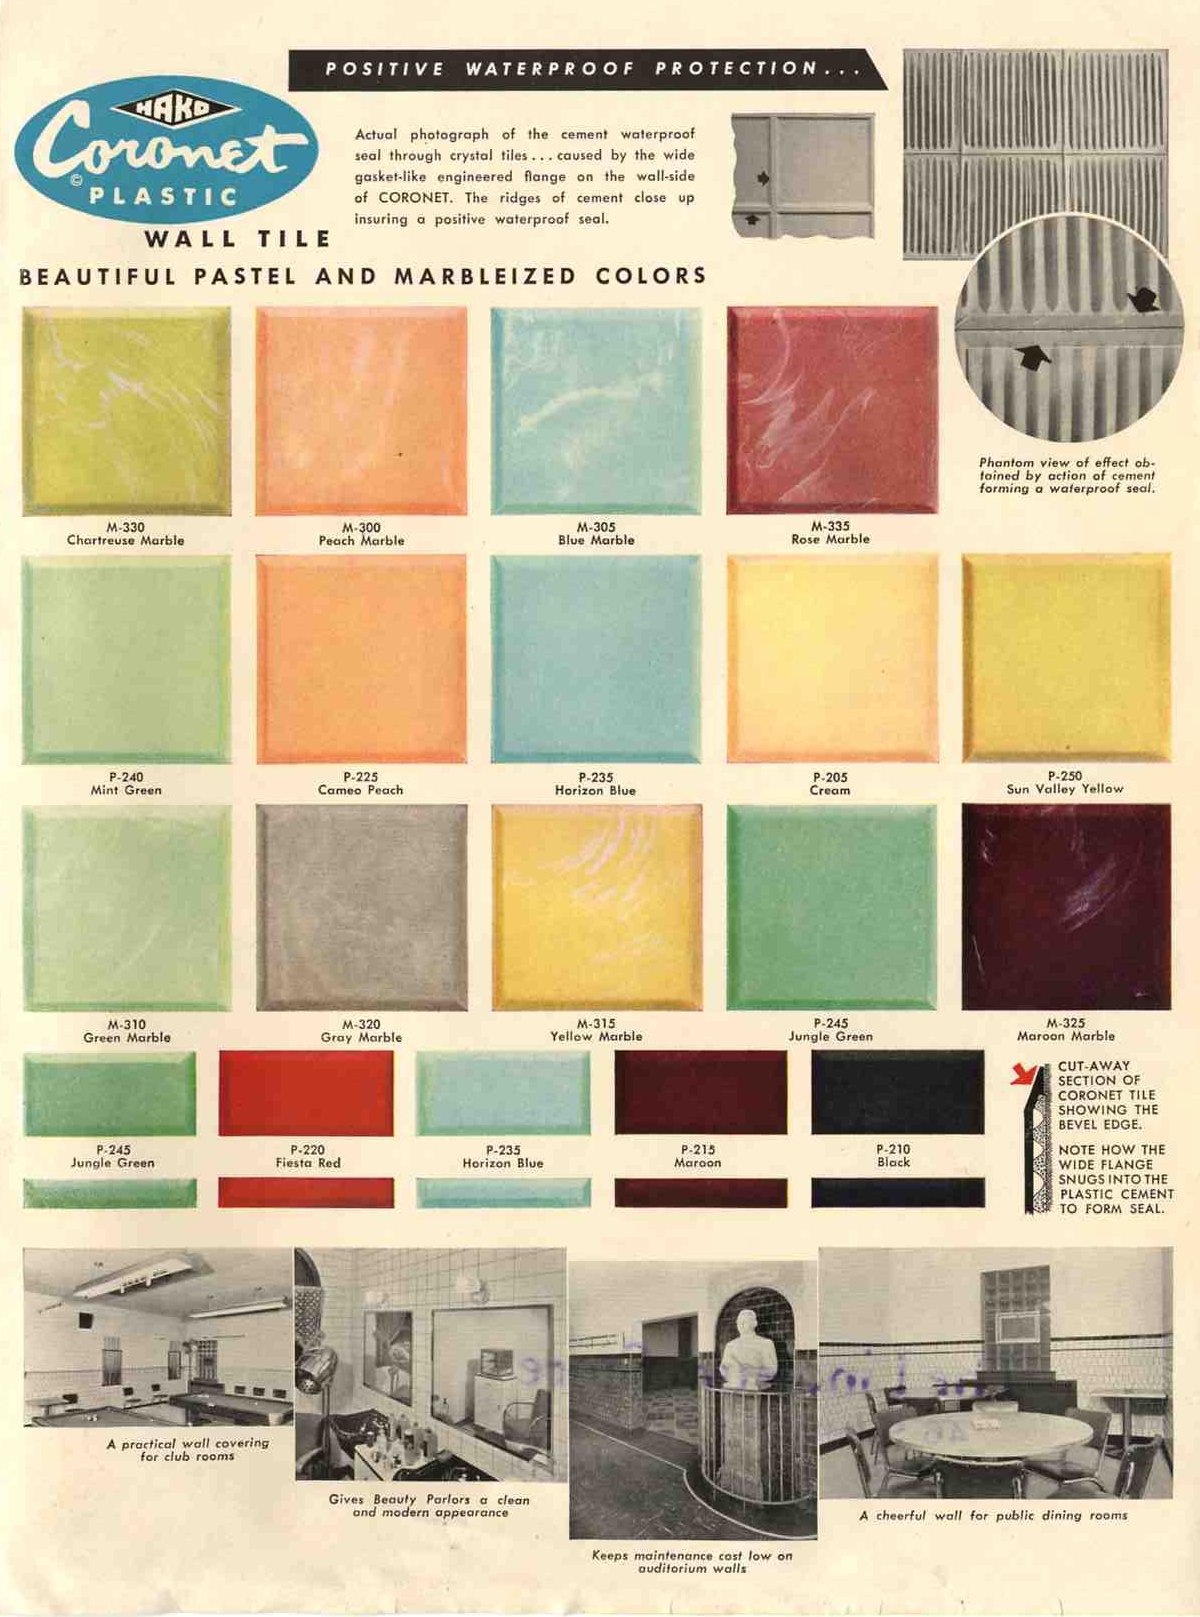 Plastic bathroom tile: 20 pages of images from 3 catalogs - Retro ...